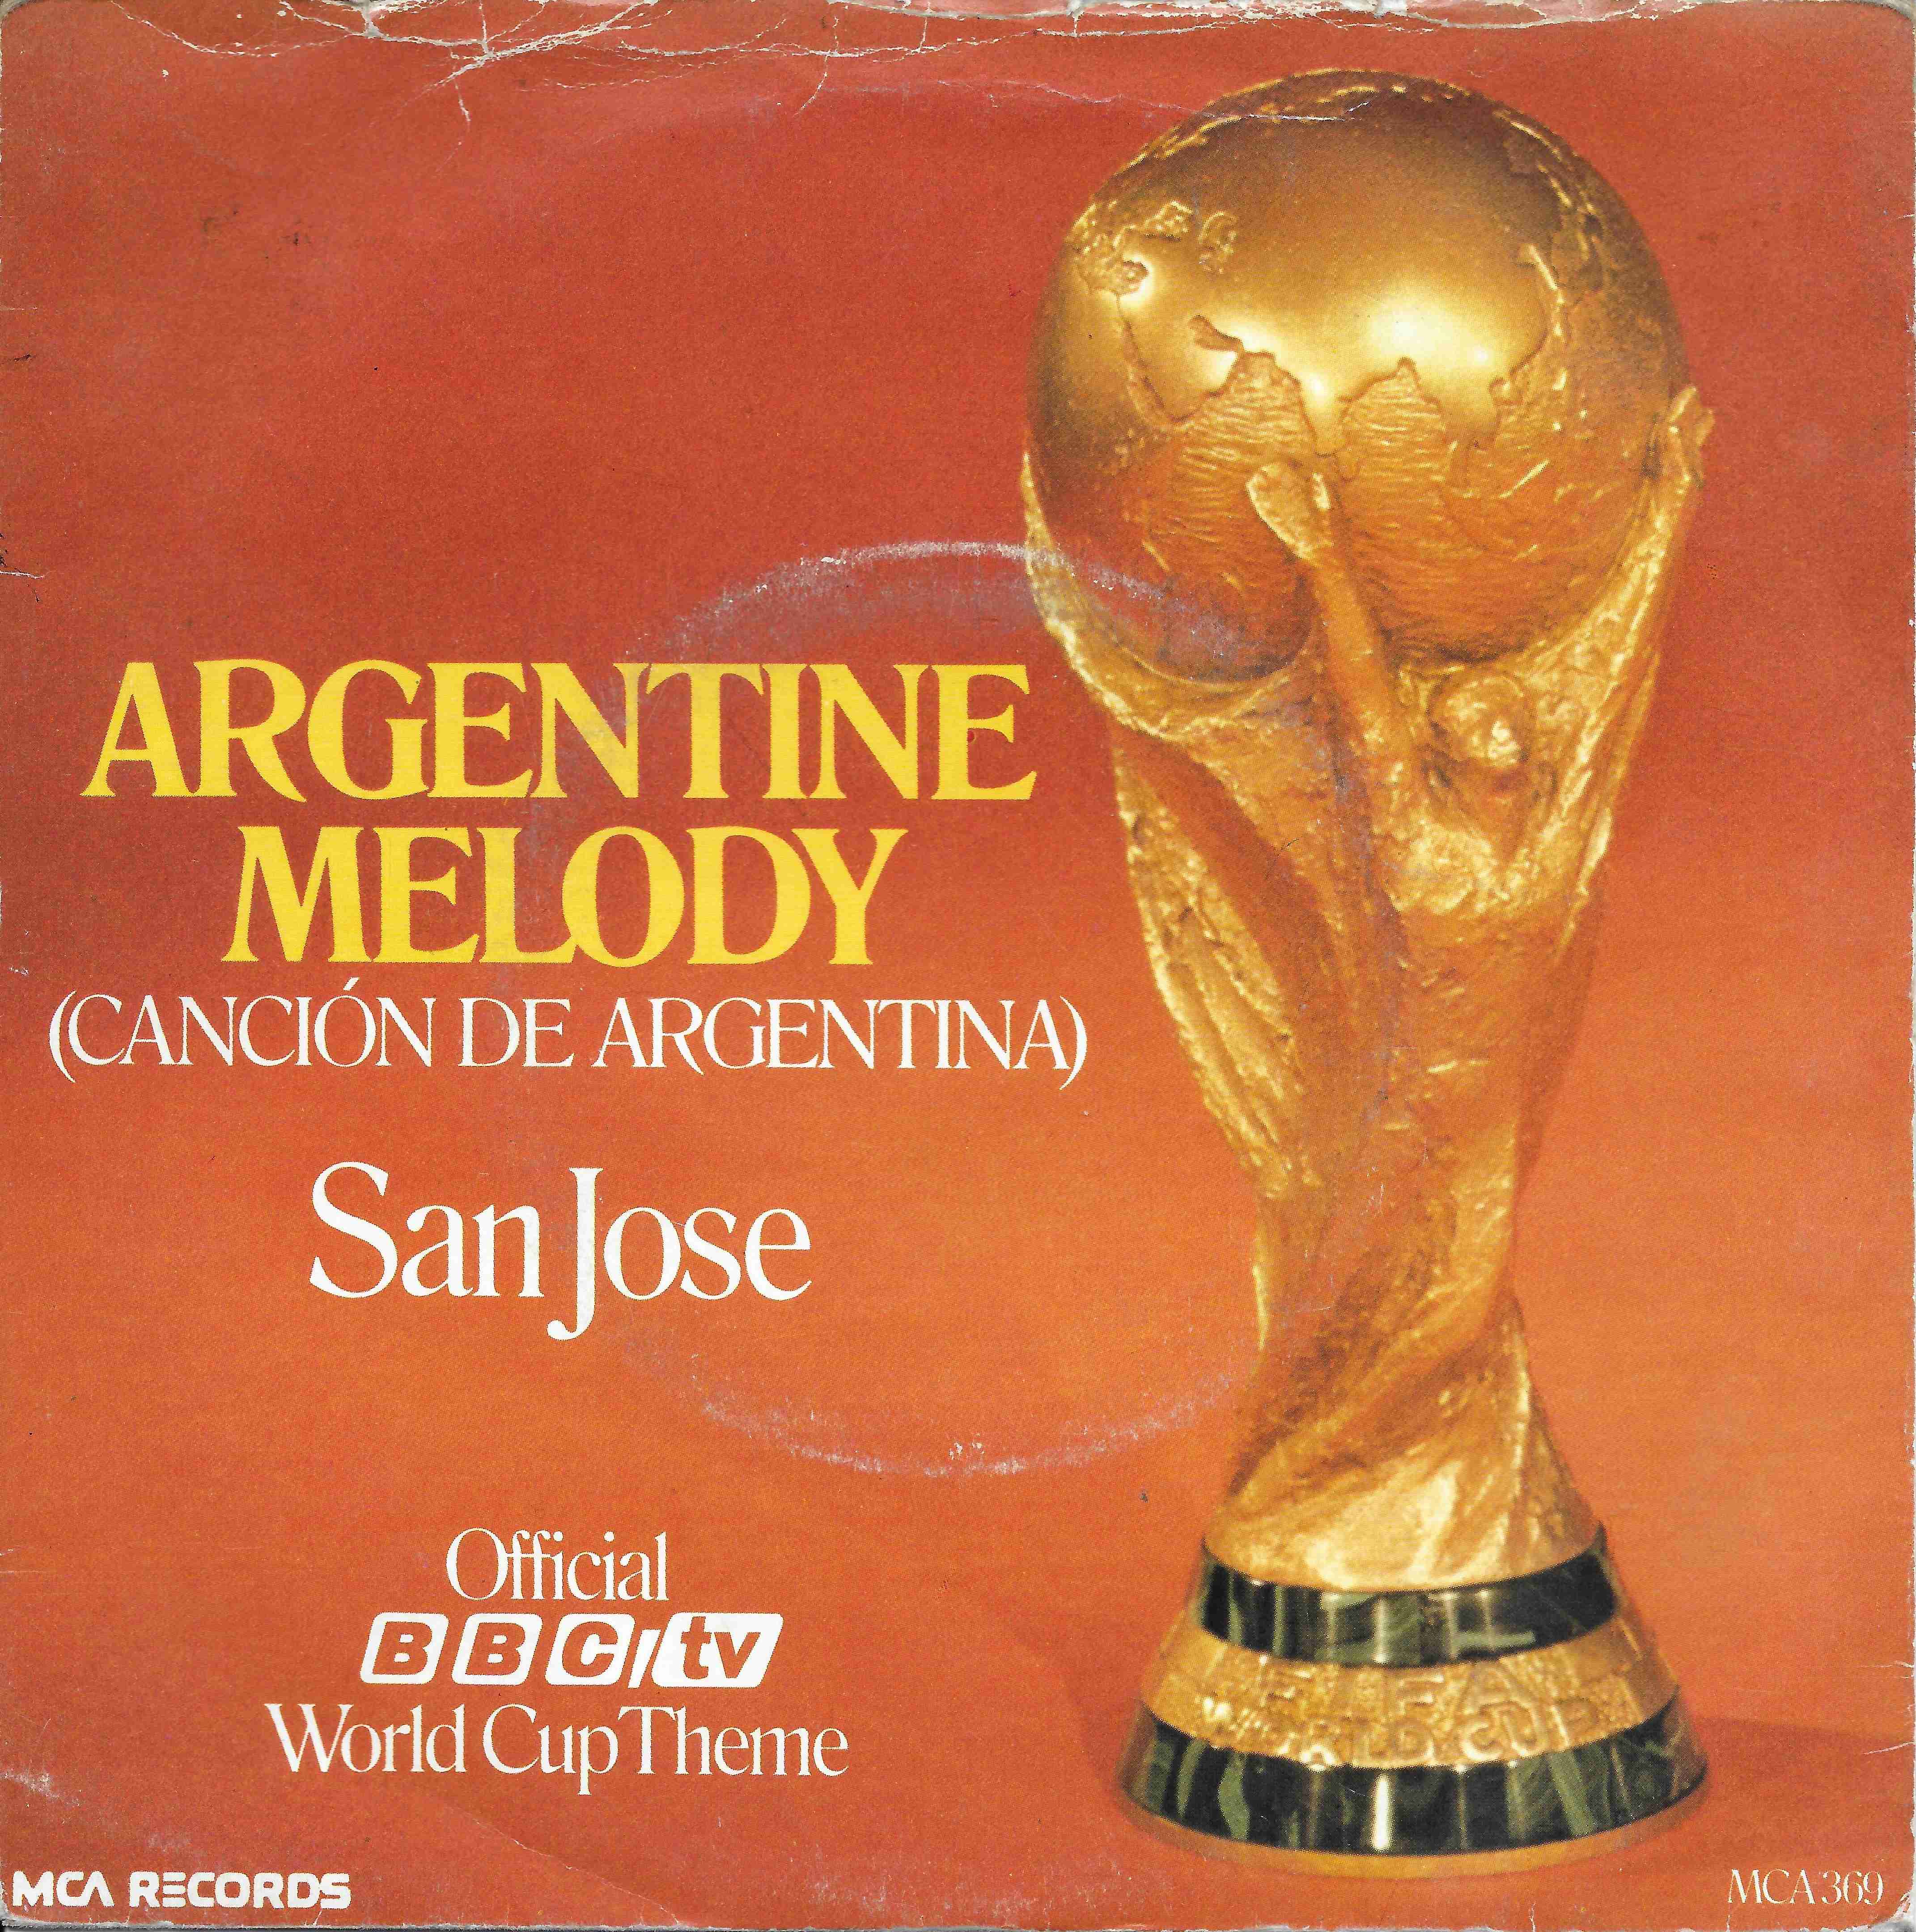 Picture of MCA 369 Argentine melody (World Cup (1978)) by artist Andrew Lloyd Webber / San Jose from the BBC records and Tapes library